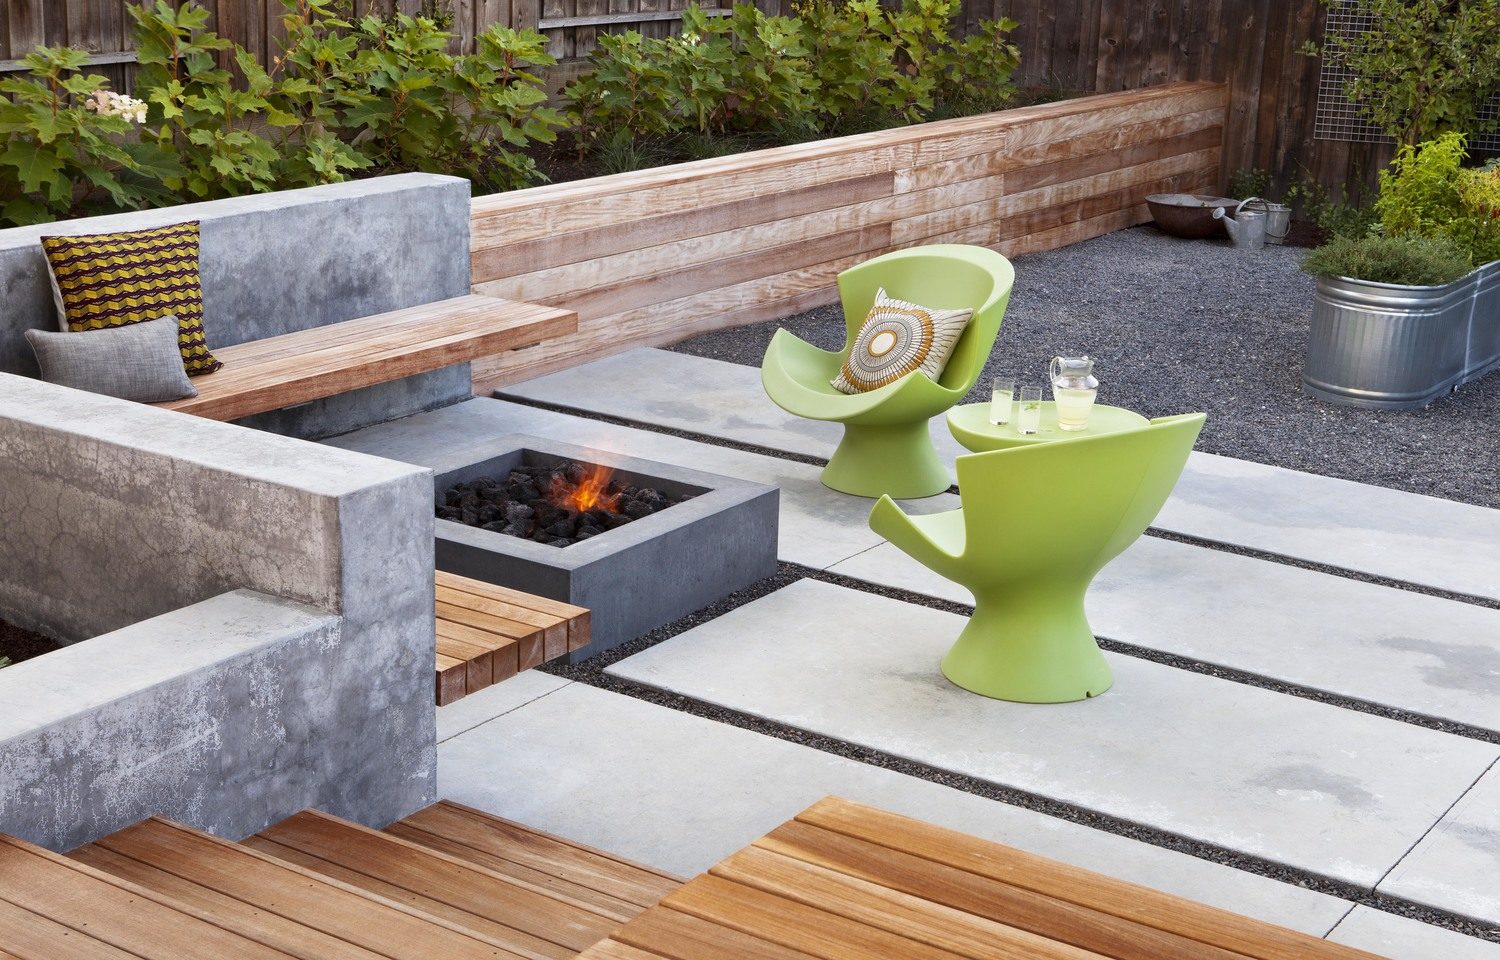 The Gathering Table by Arterra Landscape Architects